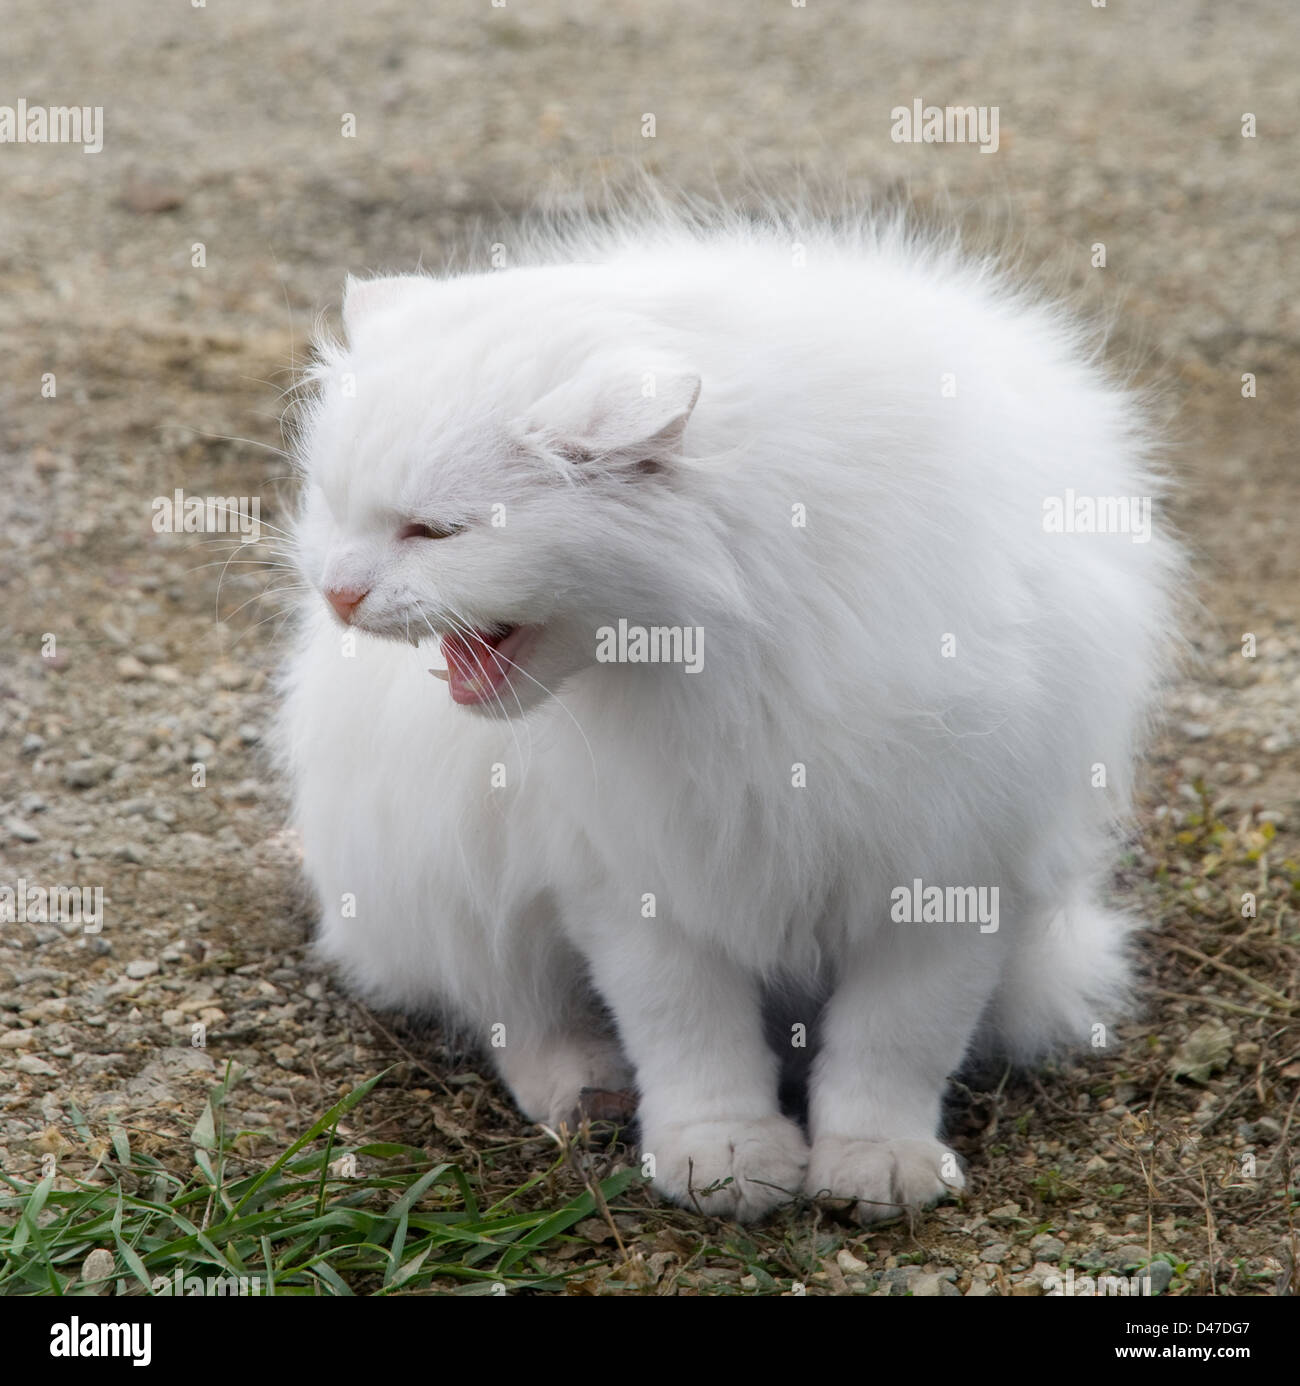 The white fluffy cat is photographed close-up Stock Photo